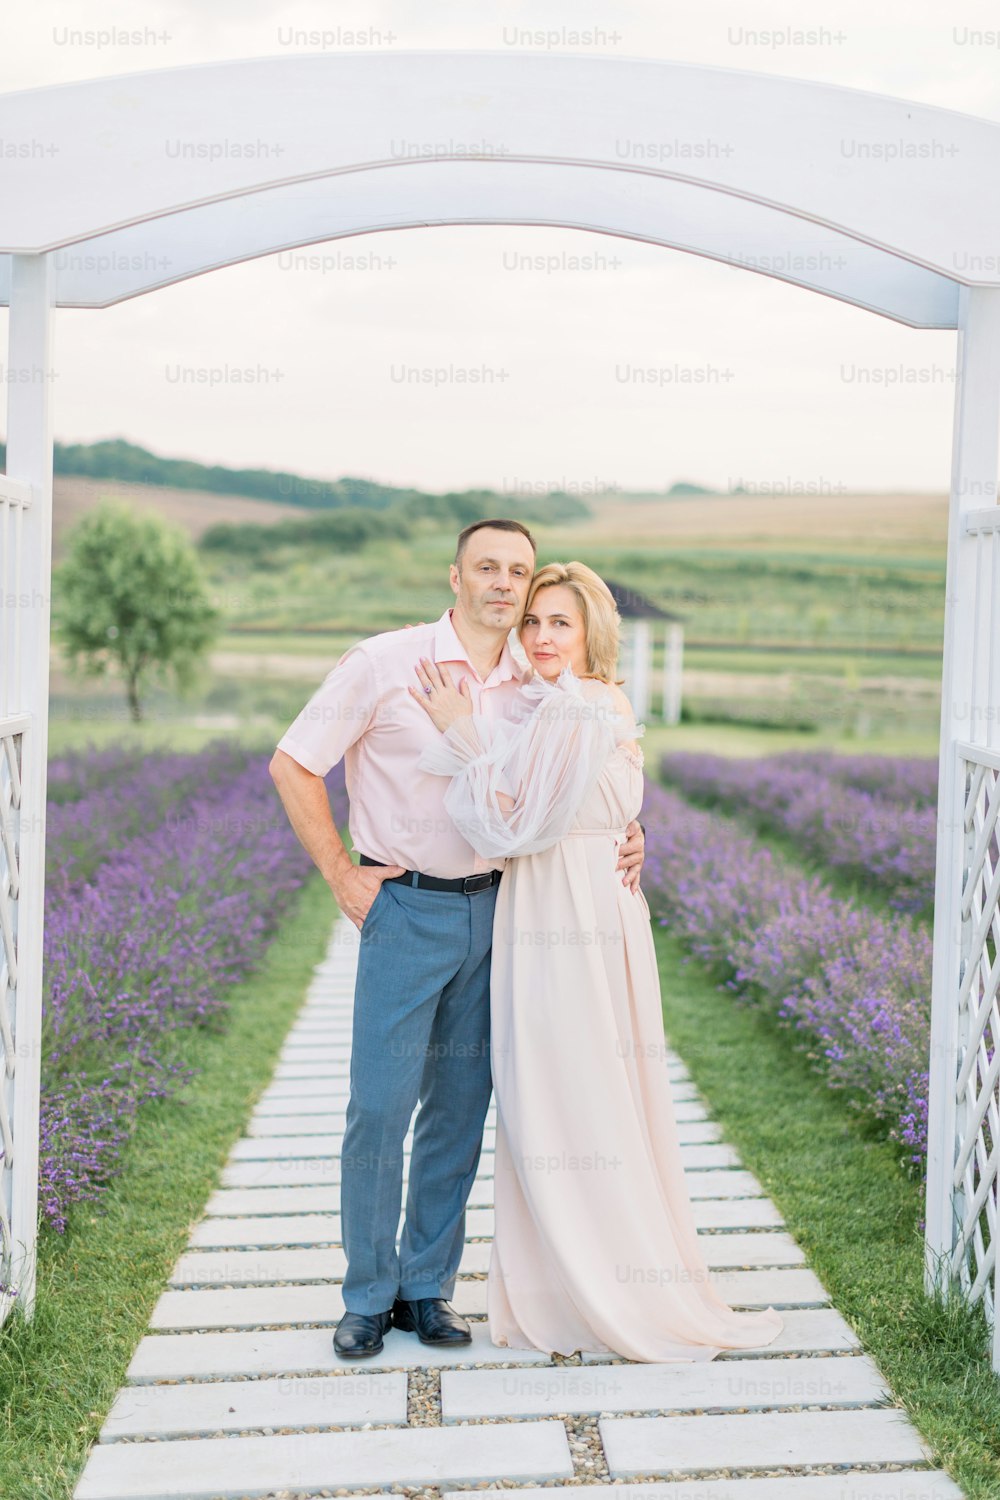 Mature couple in love standing outdoors under the wooden arch in lavender field, spending romantic date and anniversary celebration. Wedding, love and family concept